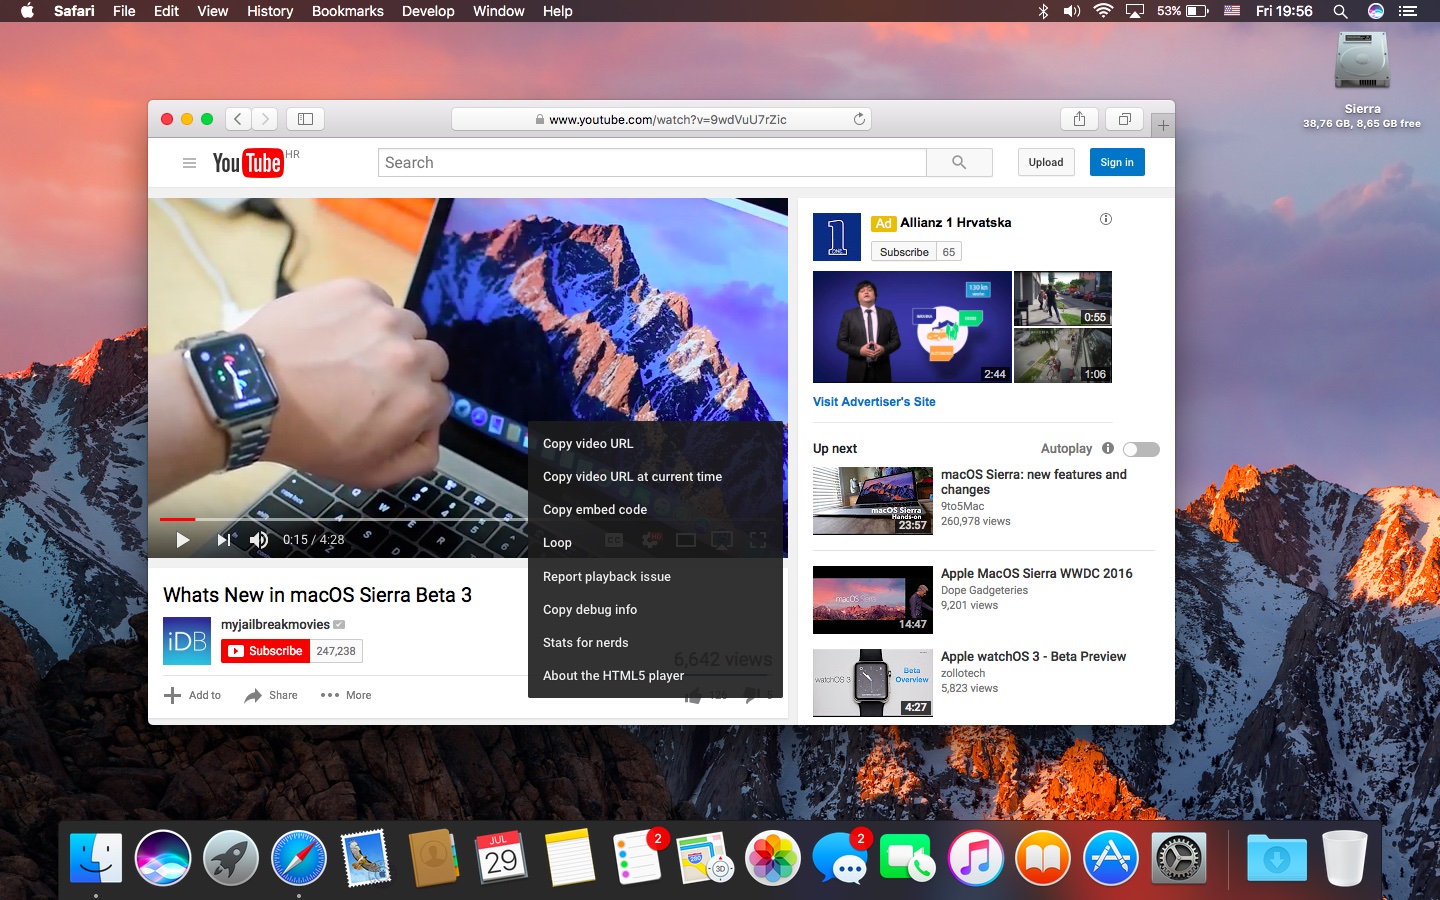 download youtube video to mac